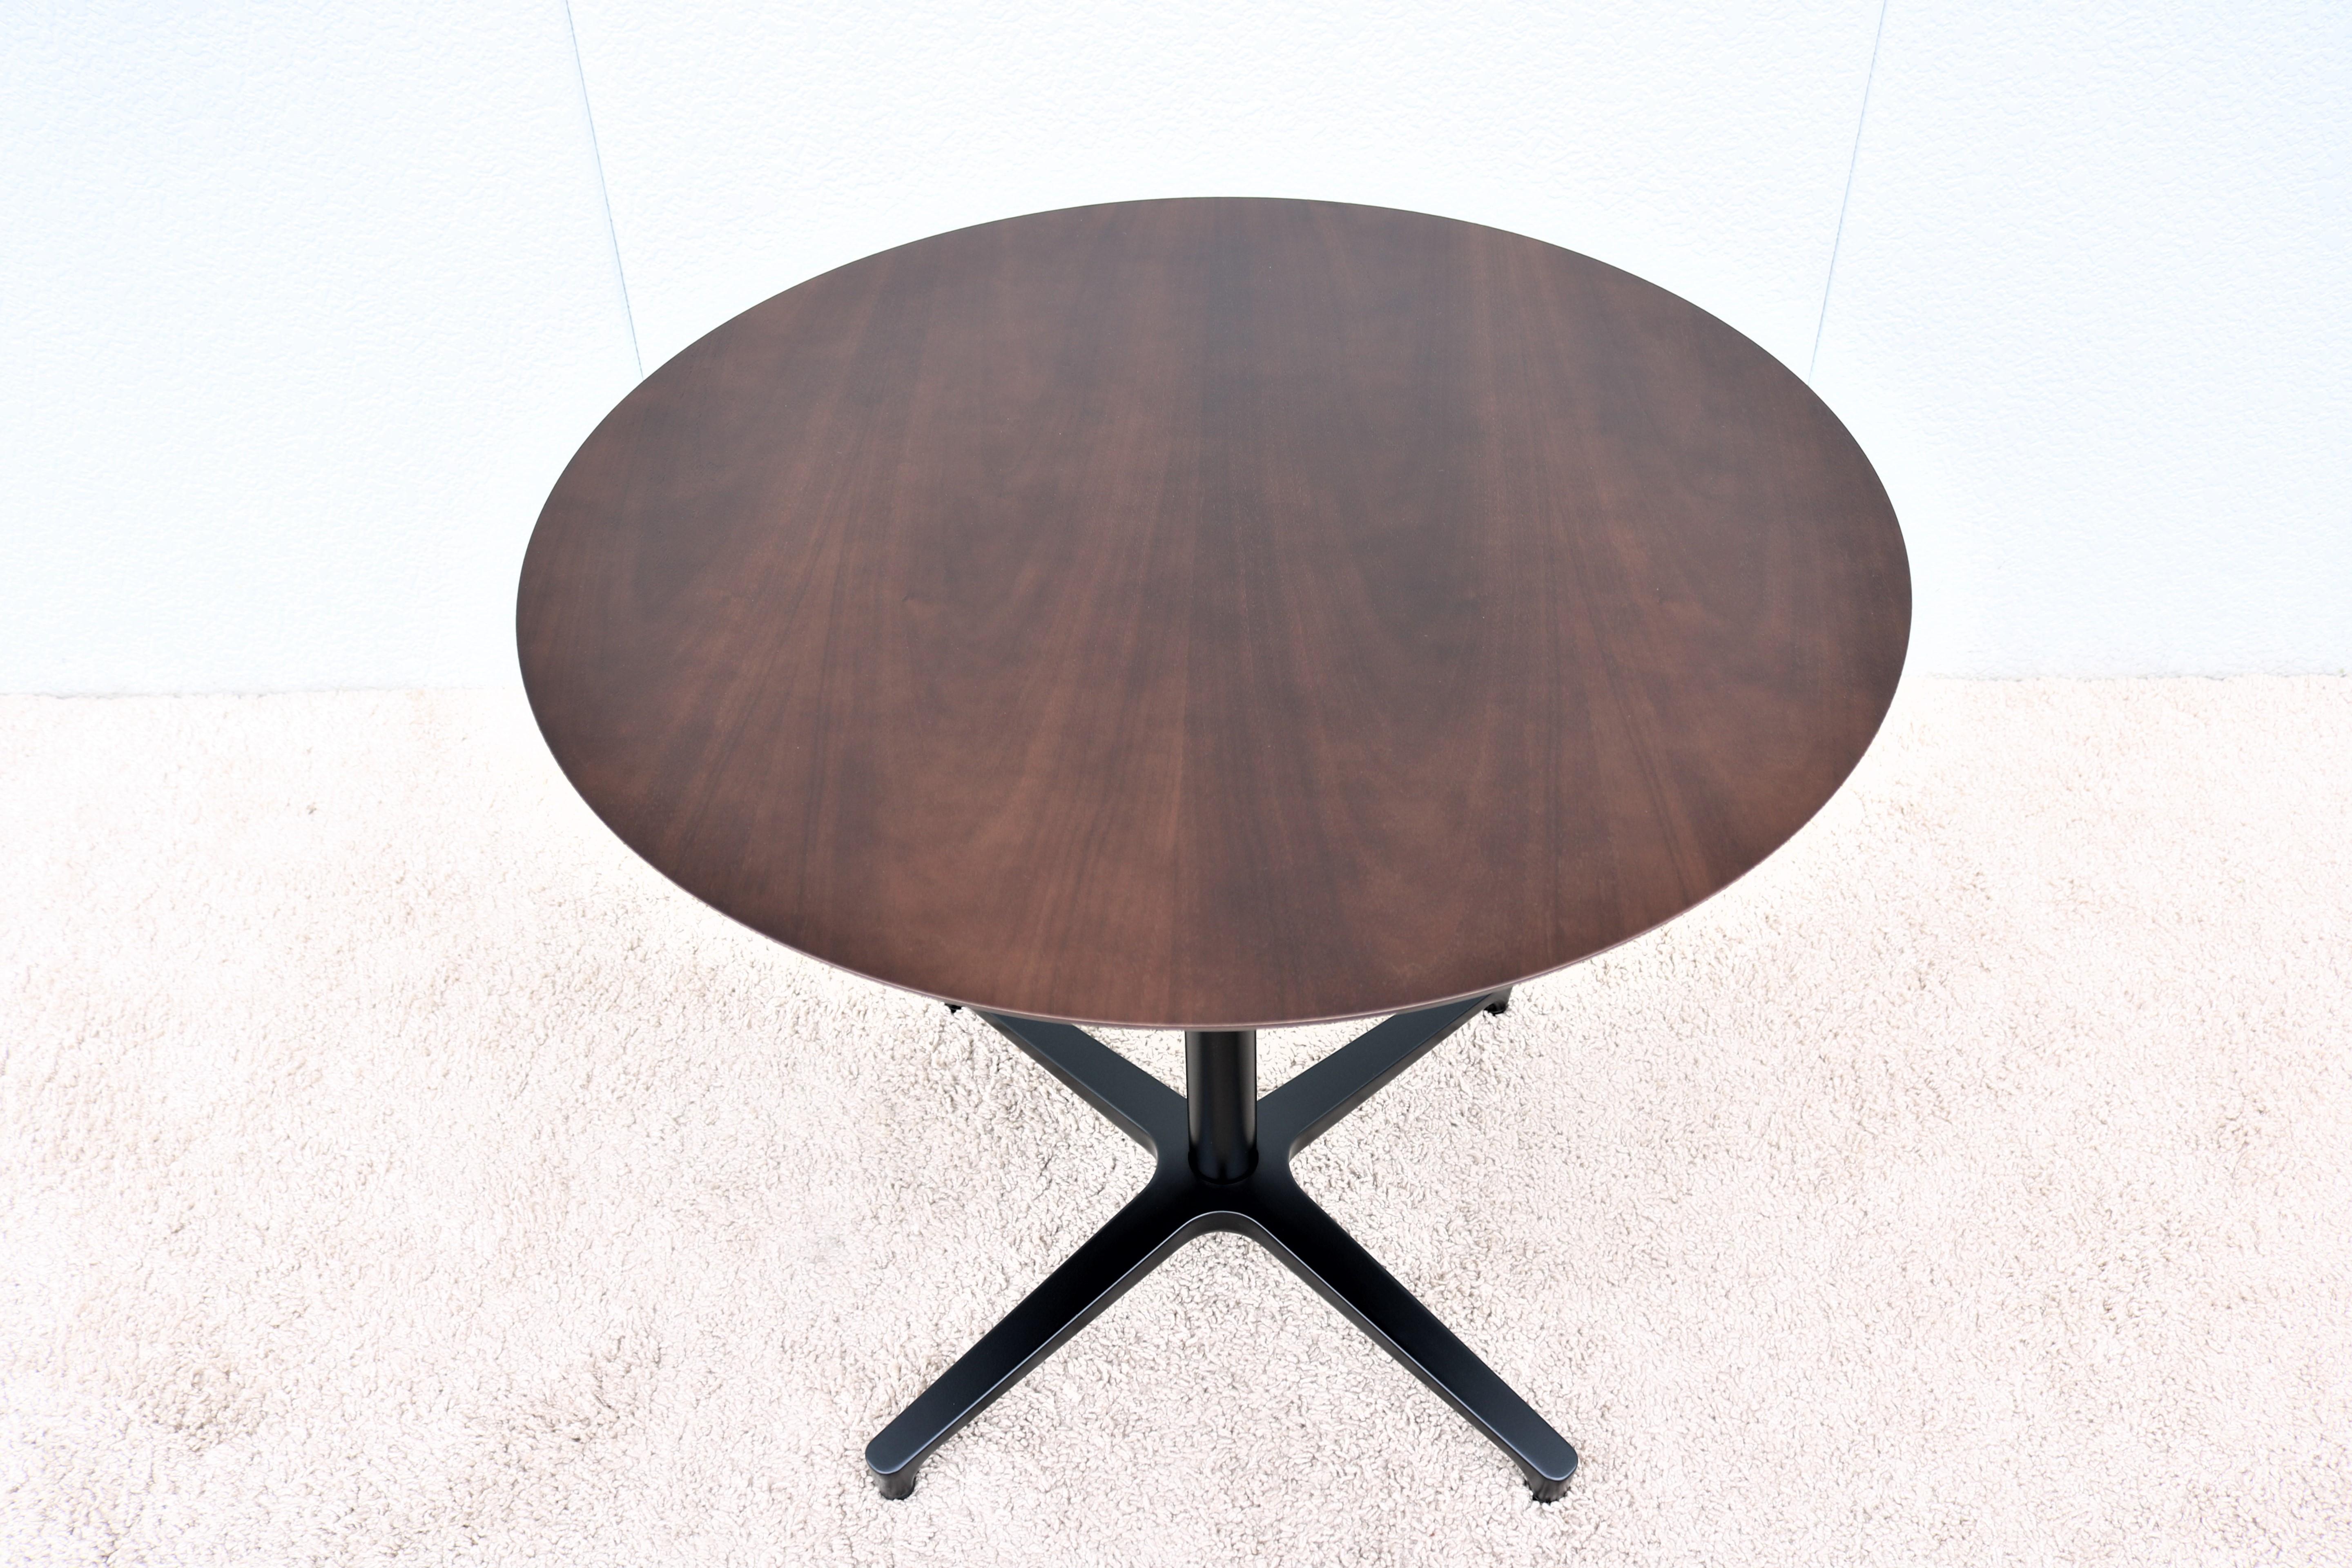 The Modern minimalist beauty and elegant sleek design of the Saiba occasional Table fits seamlessly into any environment and among Mid-Century classic design,
Very versatile could be used as Dining table or Conference table or Work table,